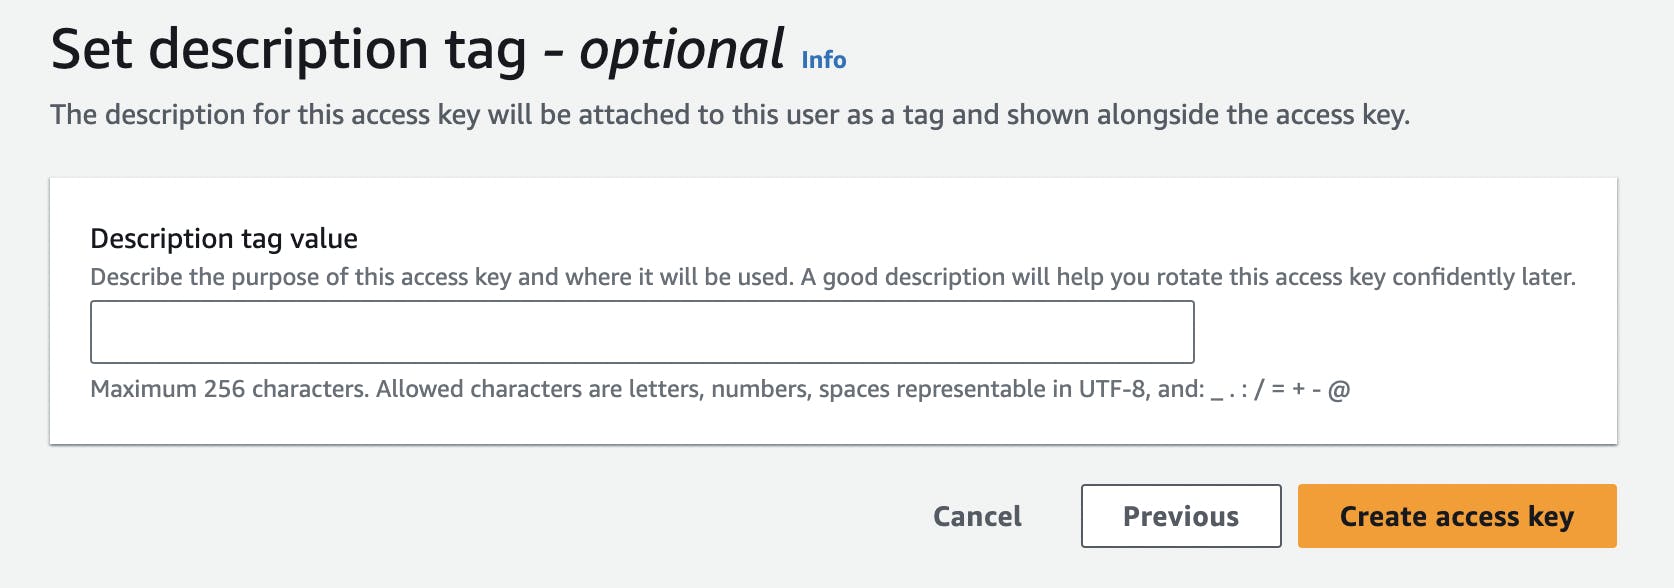 Show optional description tag field and the button to confirm to creating access key.